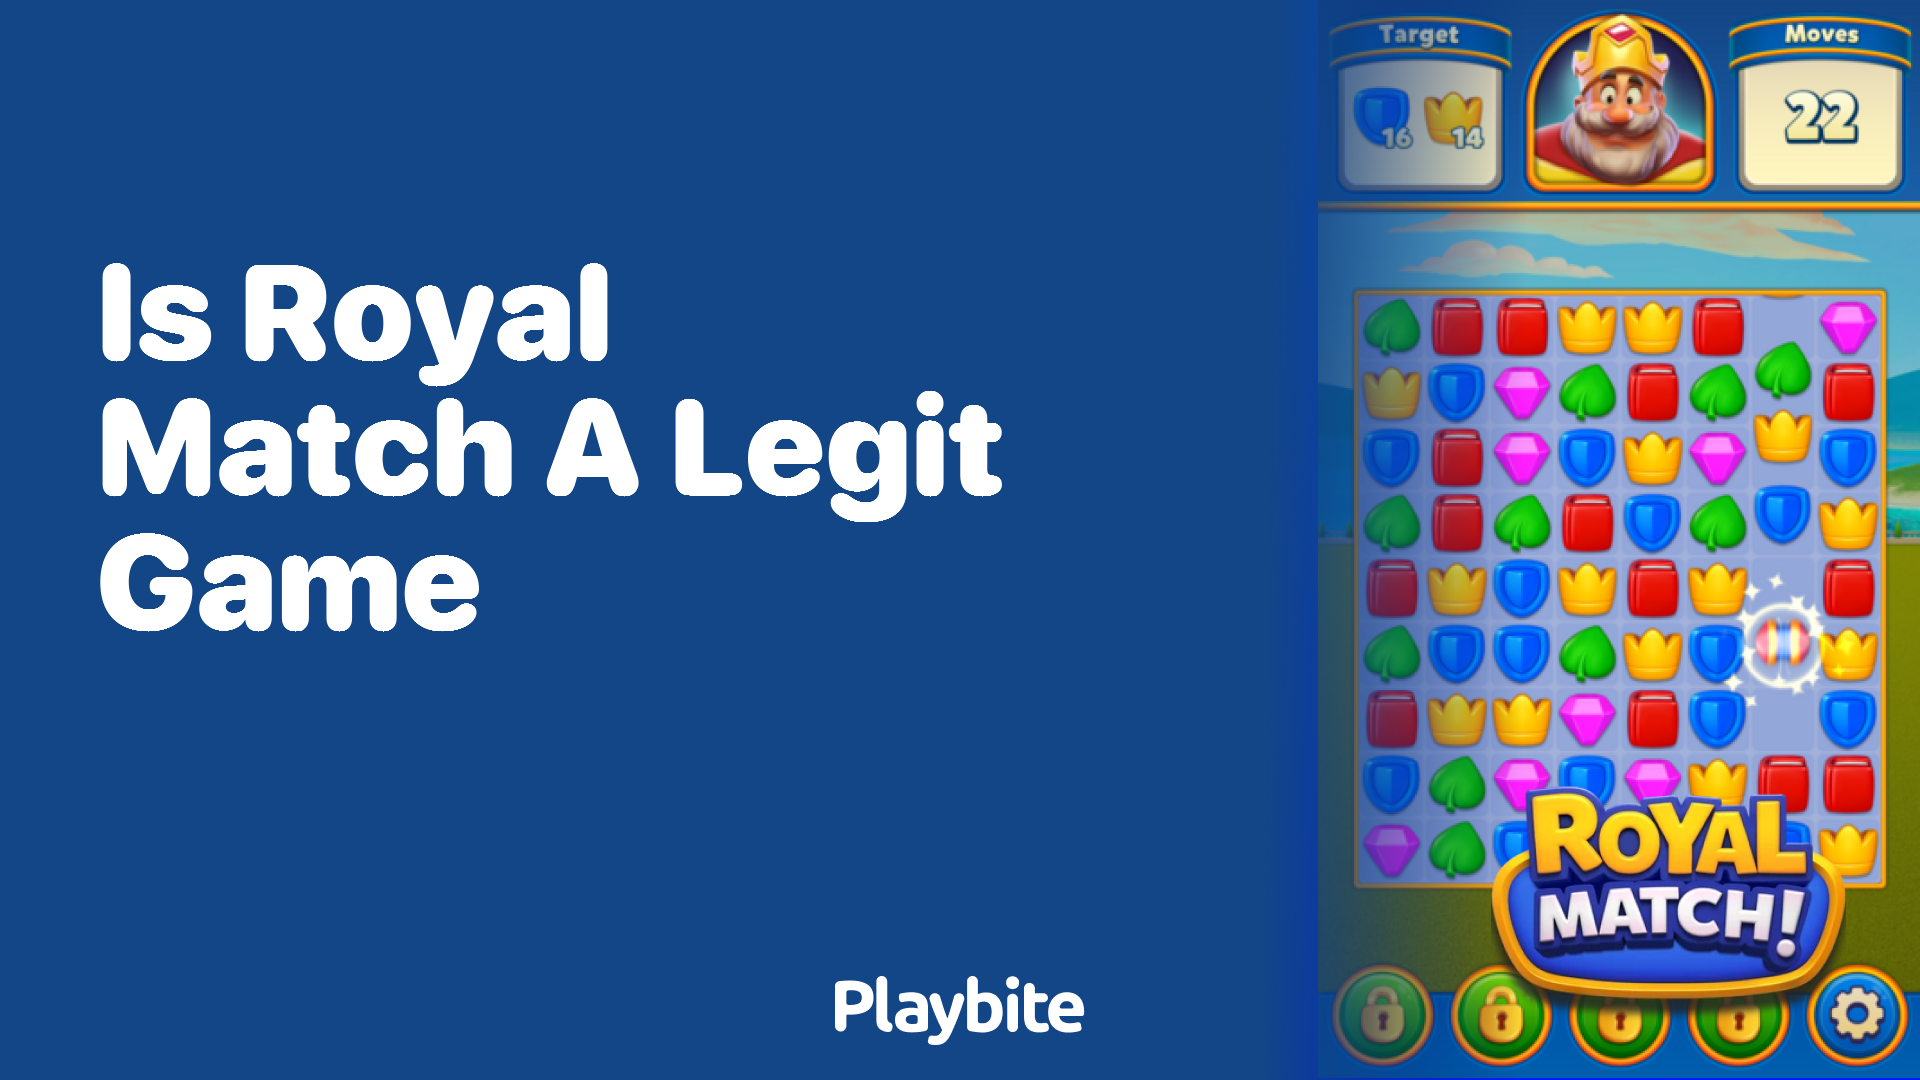 Is Royal Match a Legit Game? Find Out Here!